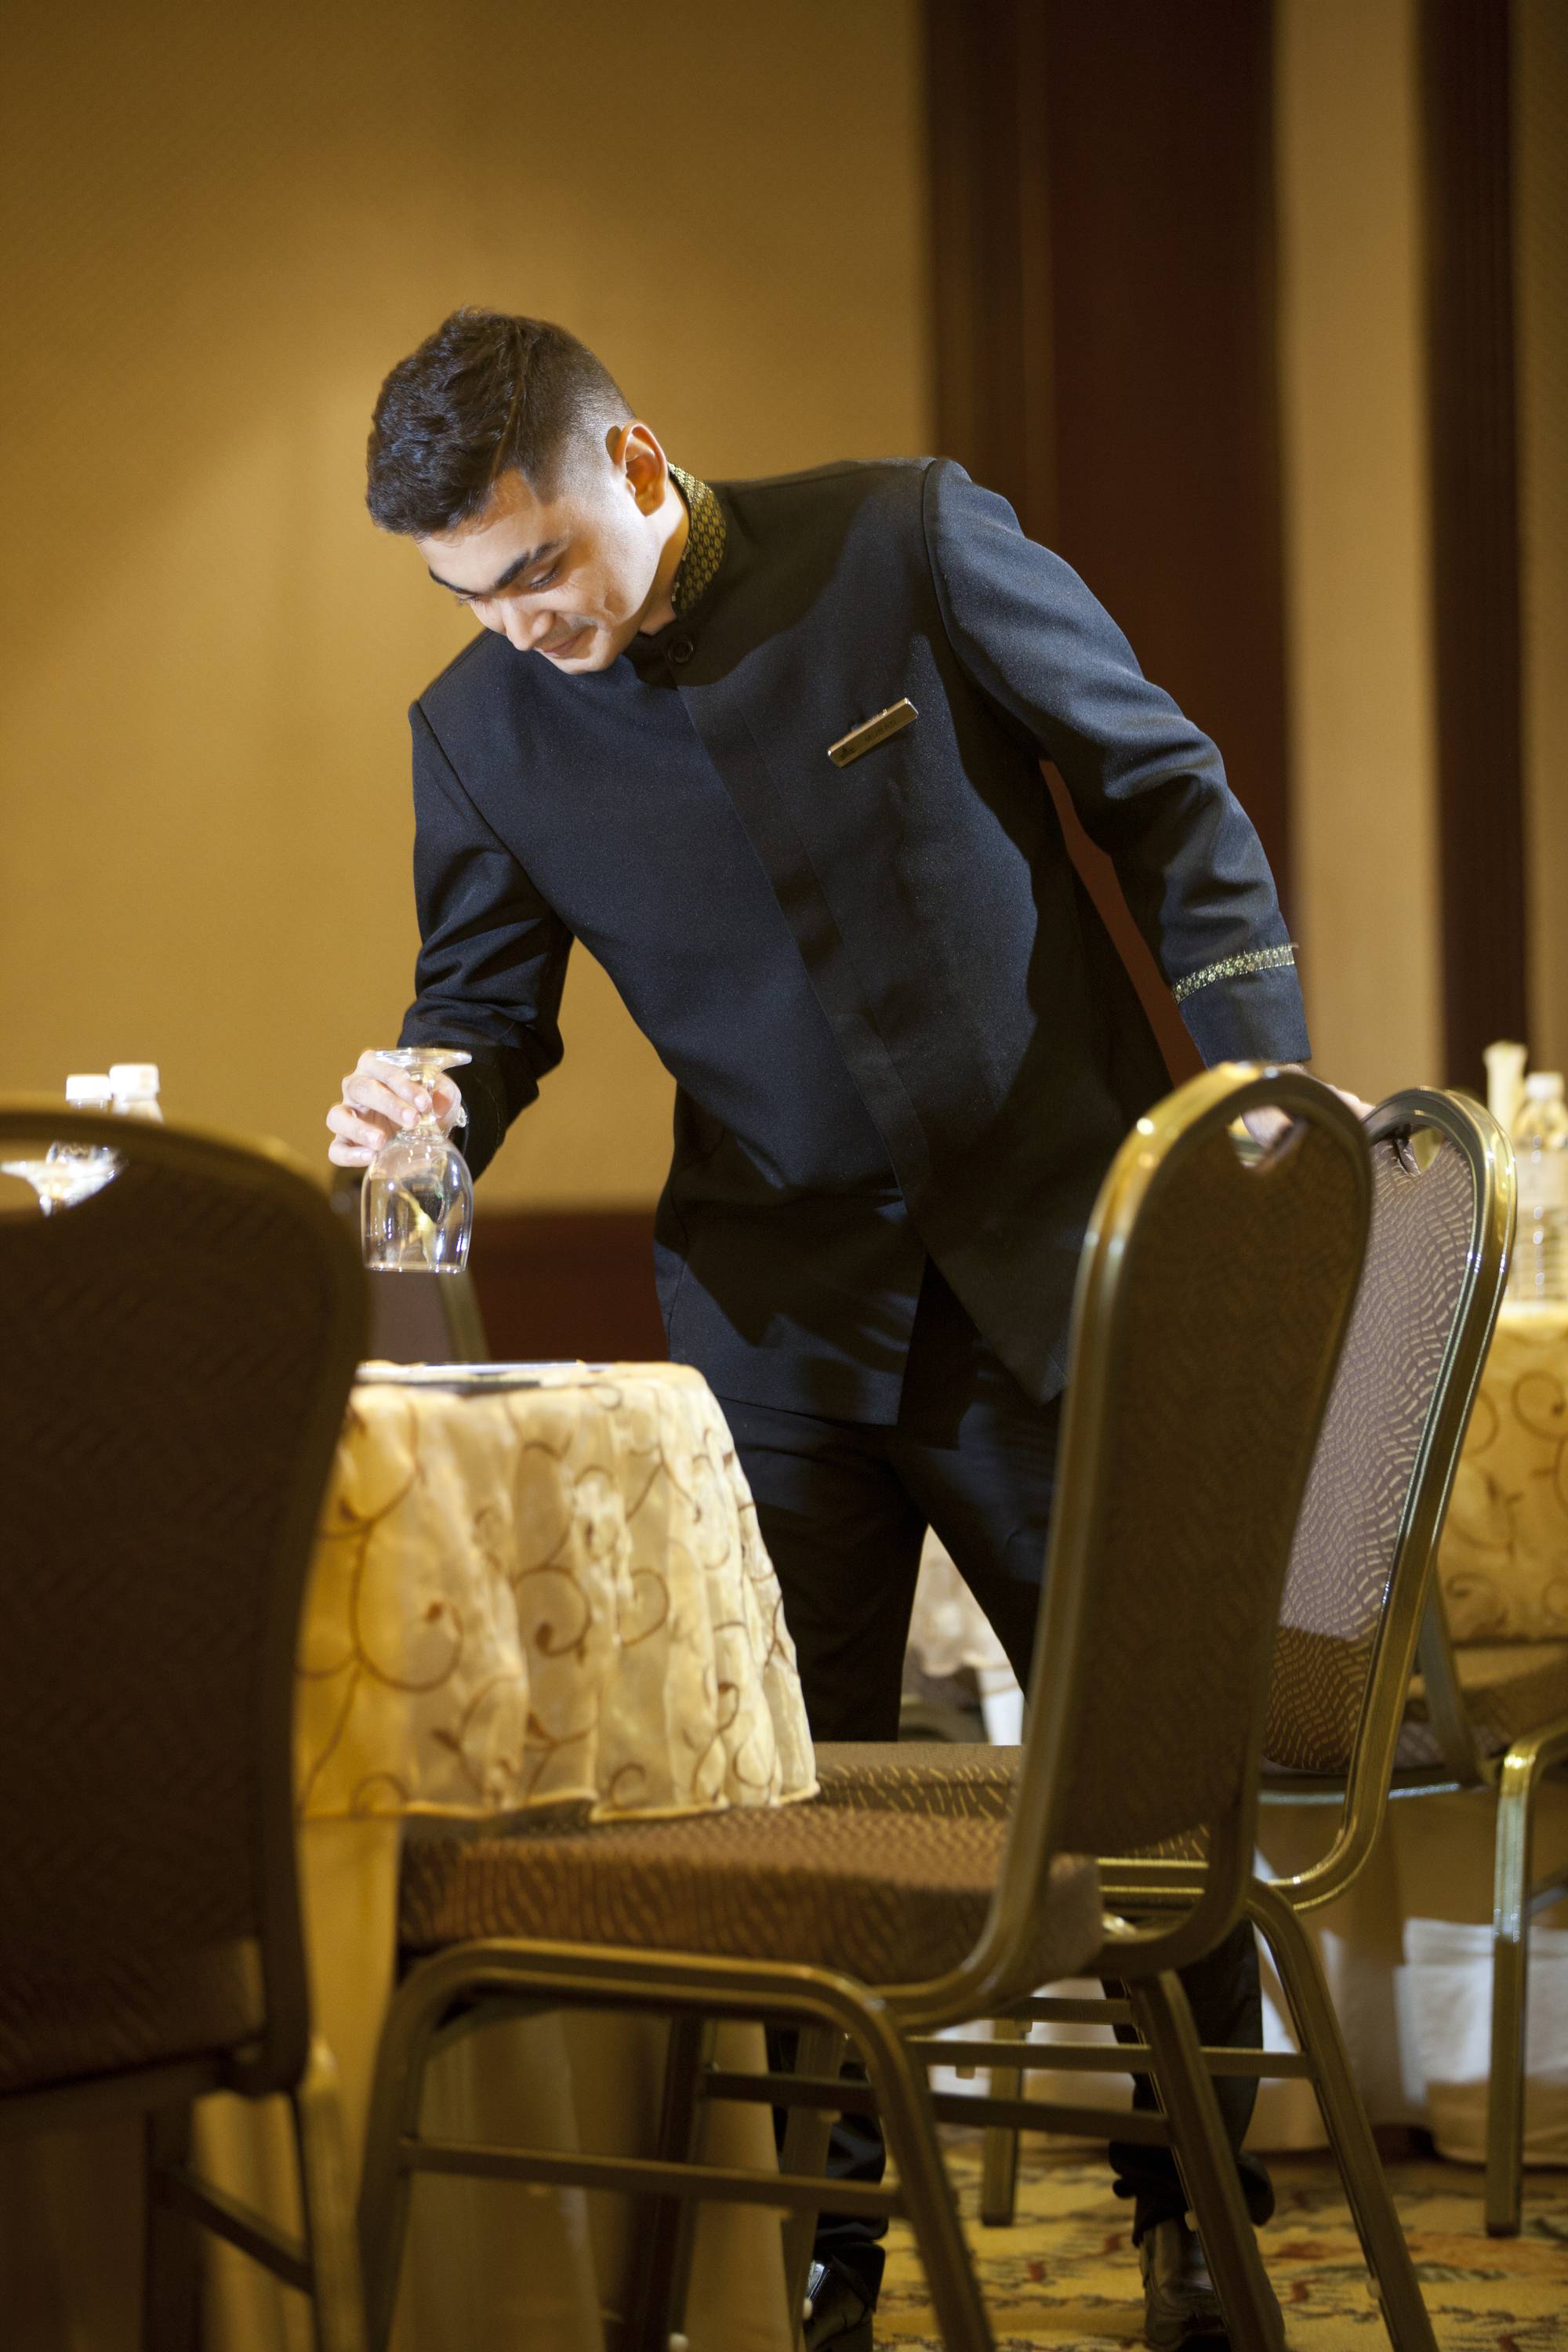 Providing elegant service to perfect your event